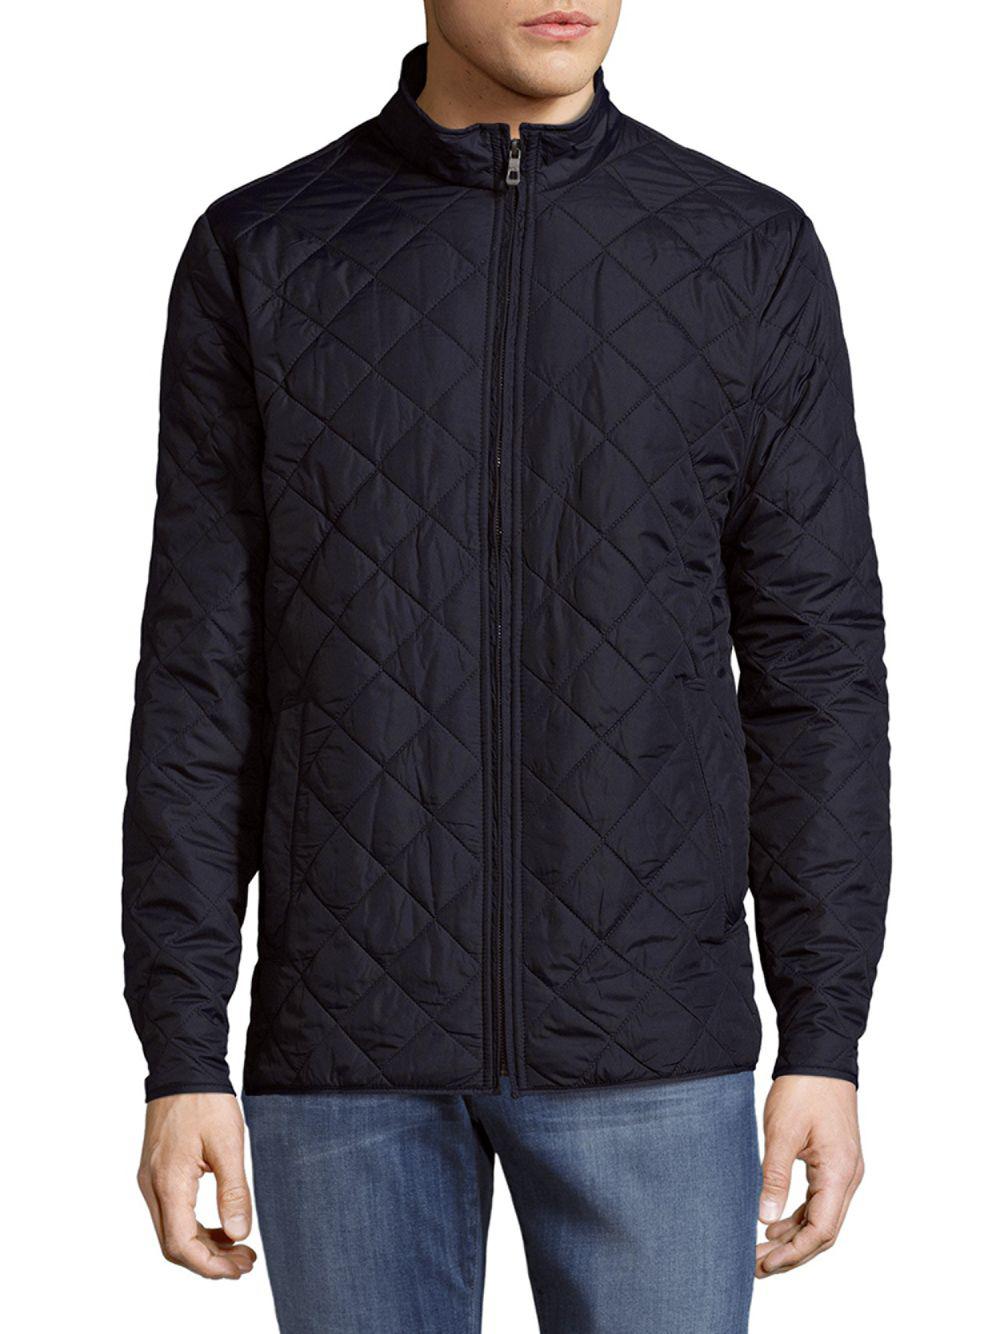 Hawke & Co. Men's Diamond Quilted Jacket Large Navy Blue